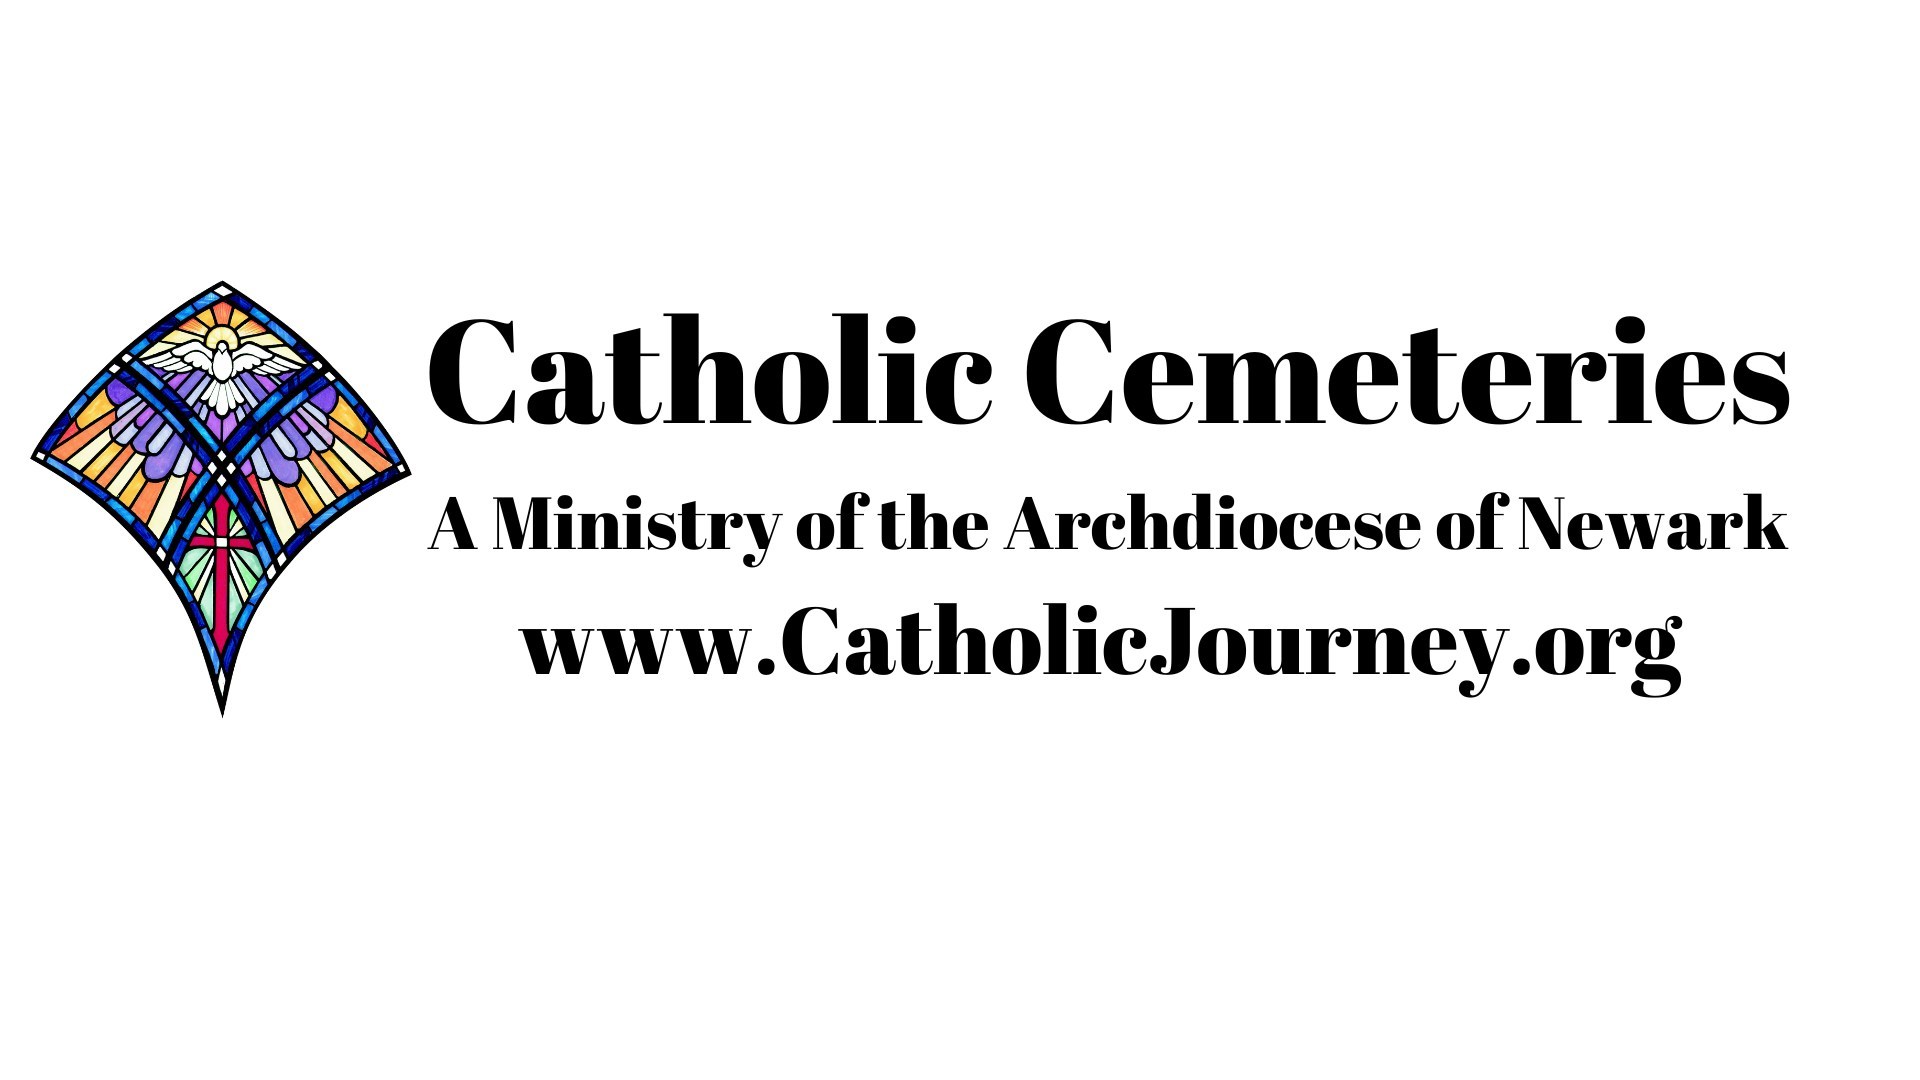 Catholic Cemeteries assist individuals and families before, during, and after losing a loved one. They also provide Monthly Masses of Remembrance celebrated at archdiocesan Catholic cemeteries throughout the year, typically during the first week of each month and on special days. Contact a caring and professional Memorial Planning Advisor at cemetery@rcan.org or learn more at www.CatholicJourney.org.